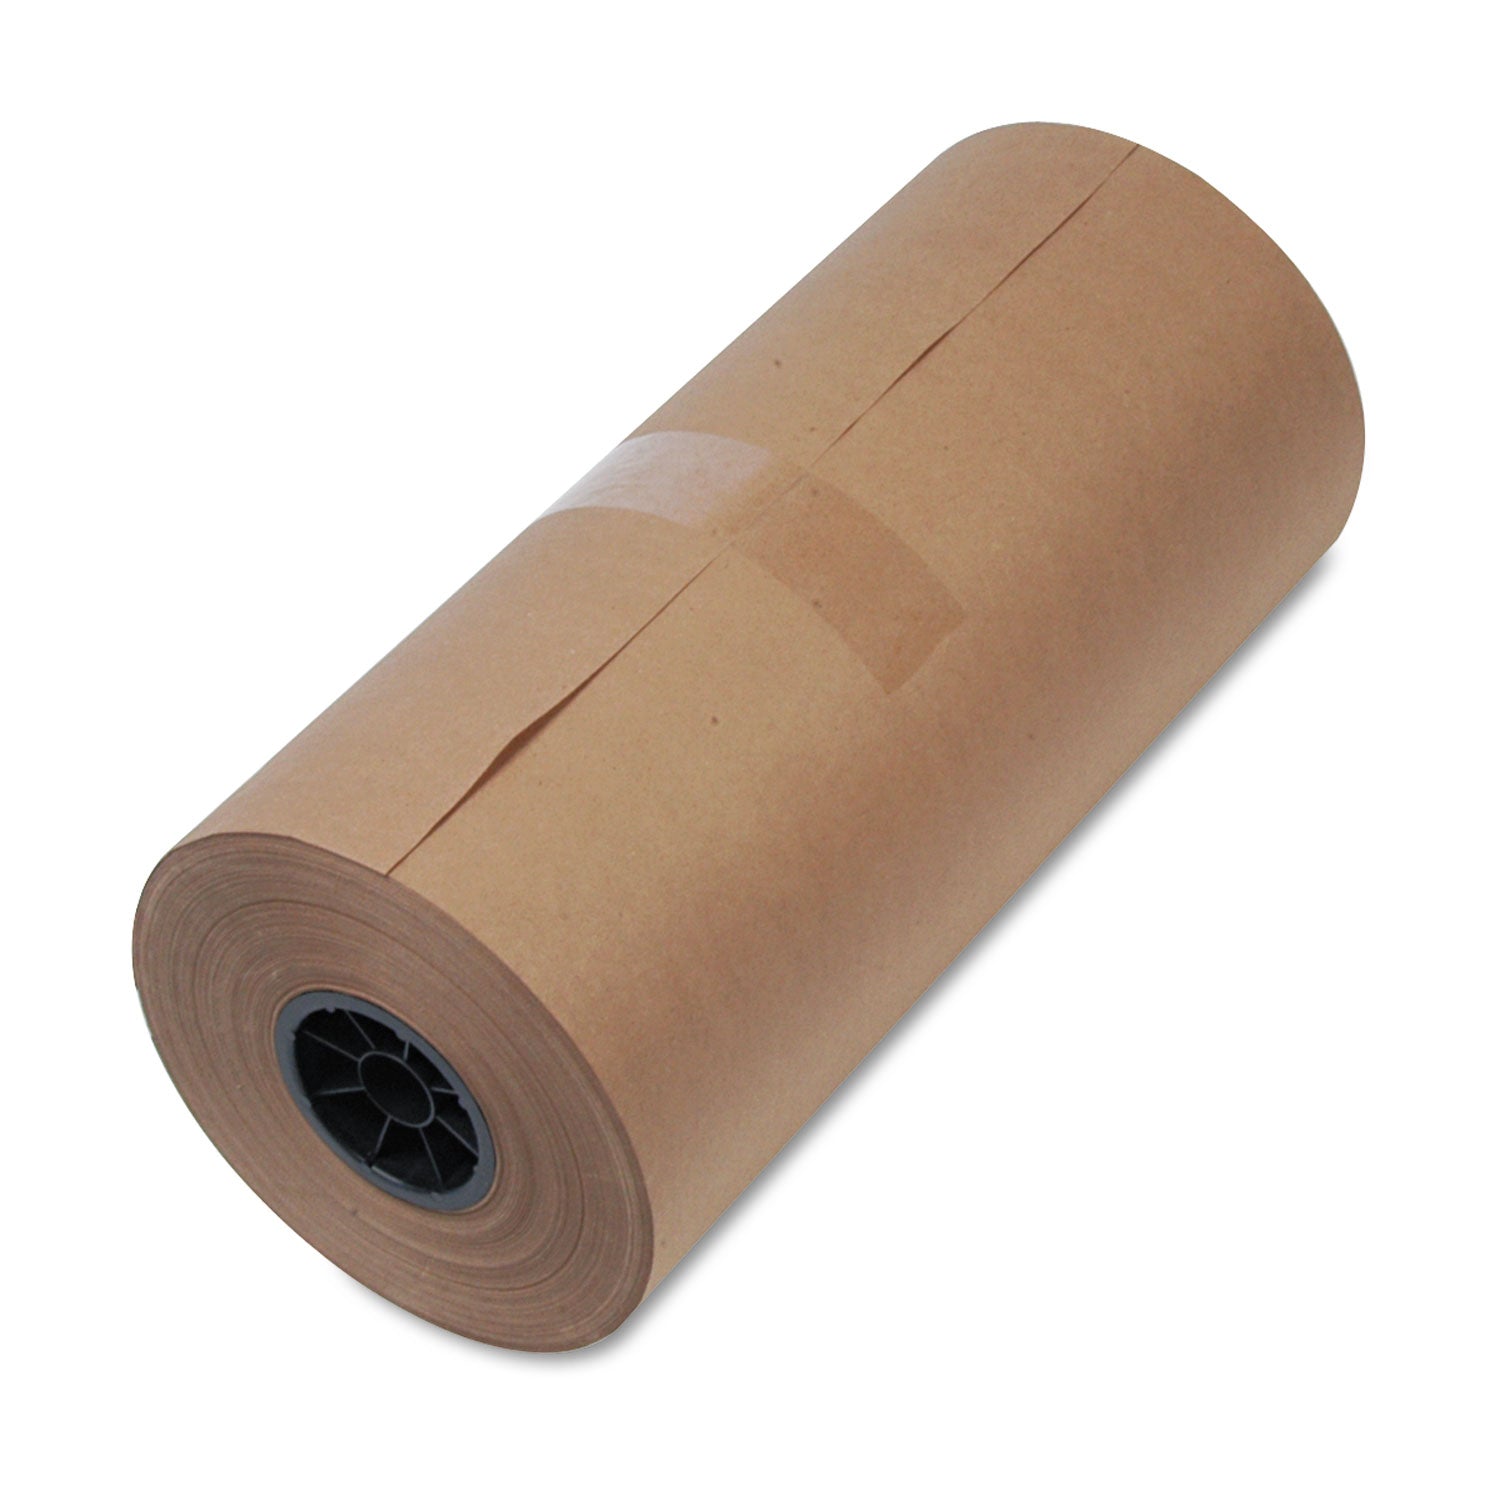 high-volume-mediumweight-wrapping-paper-roll-40-lb-wrapping-weight-stock-18-x-900-ft-brown_unv1300015 - 1